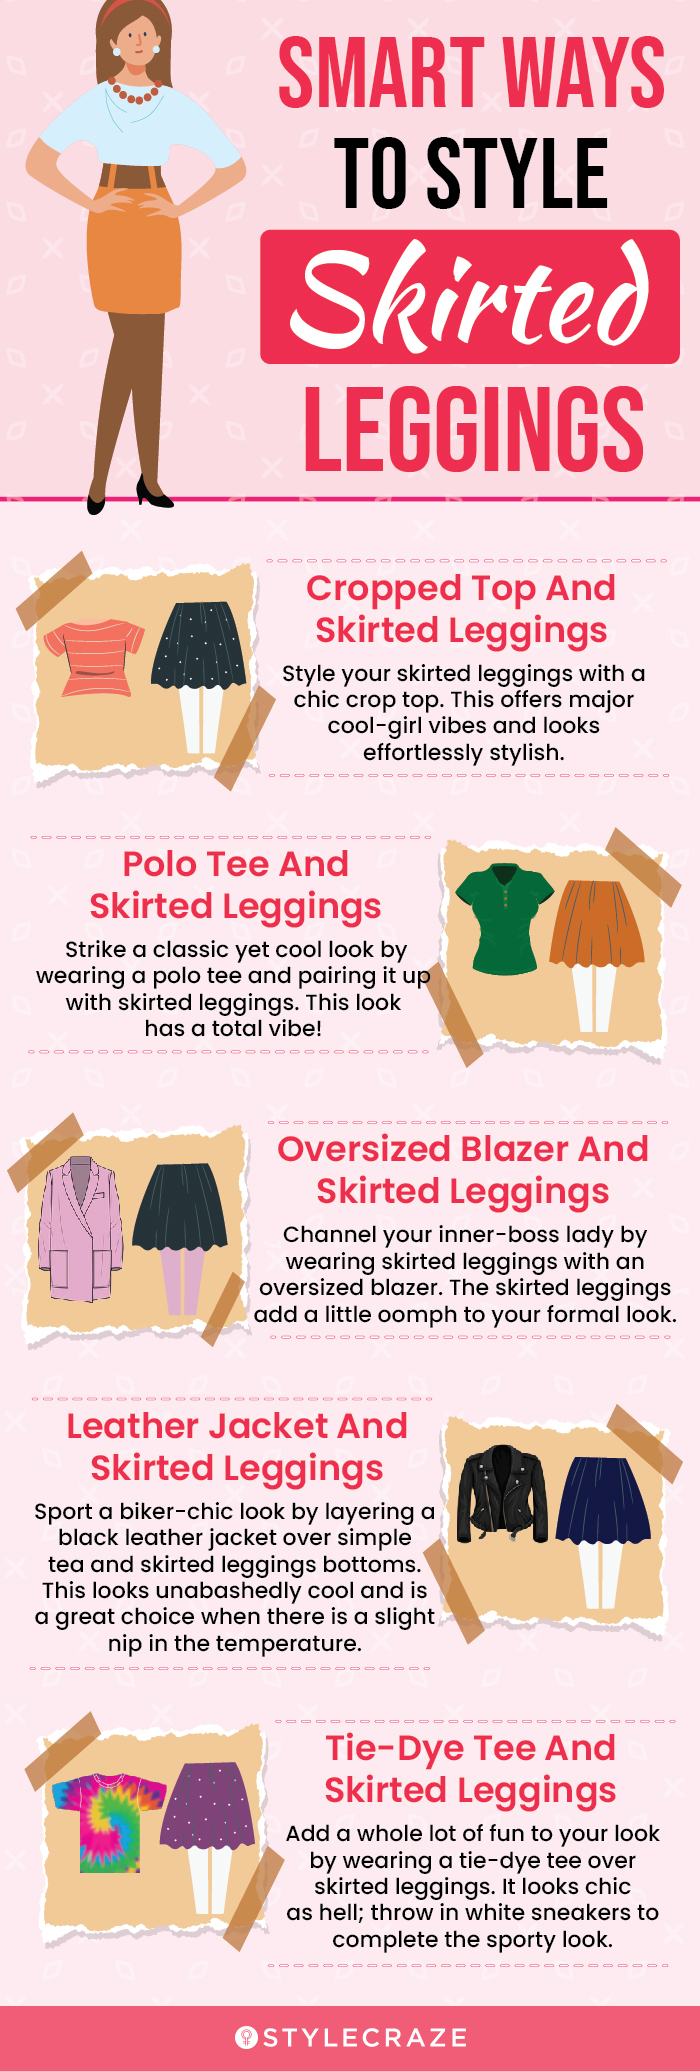 Smart Ways To Style Skirted Leggings (infographic)